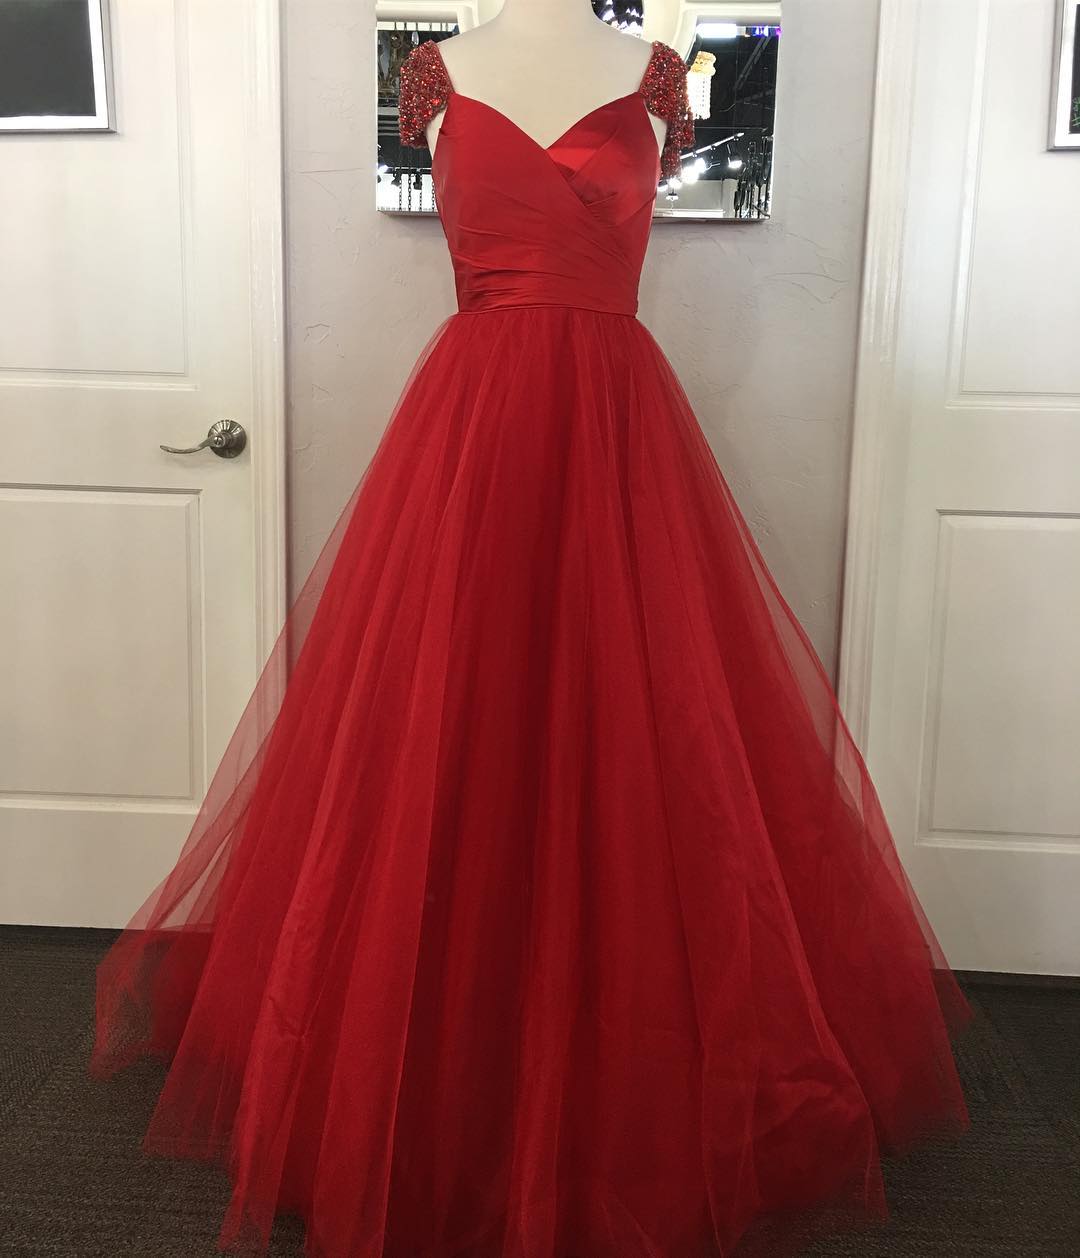 Plus Size Red Tulle A-line Prom Dresses Cap Sleeves Beaded Evening Dresses Sexy Formal Gowns Party Dress,pd14039